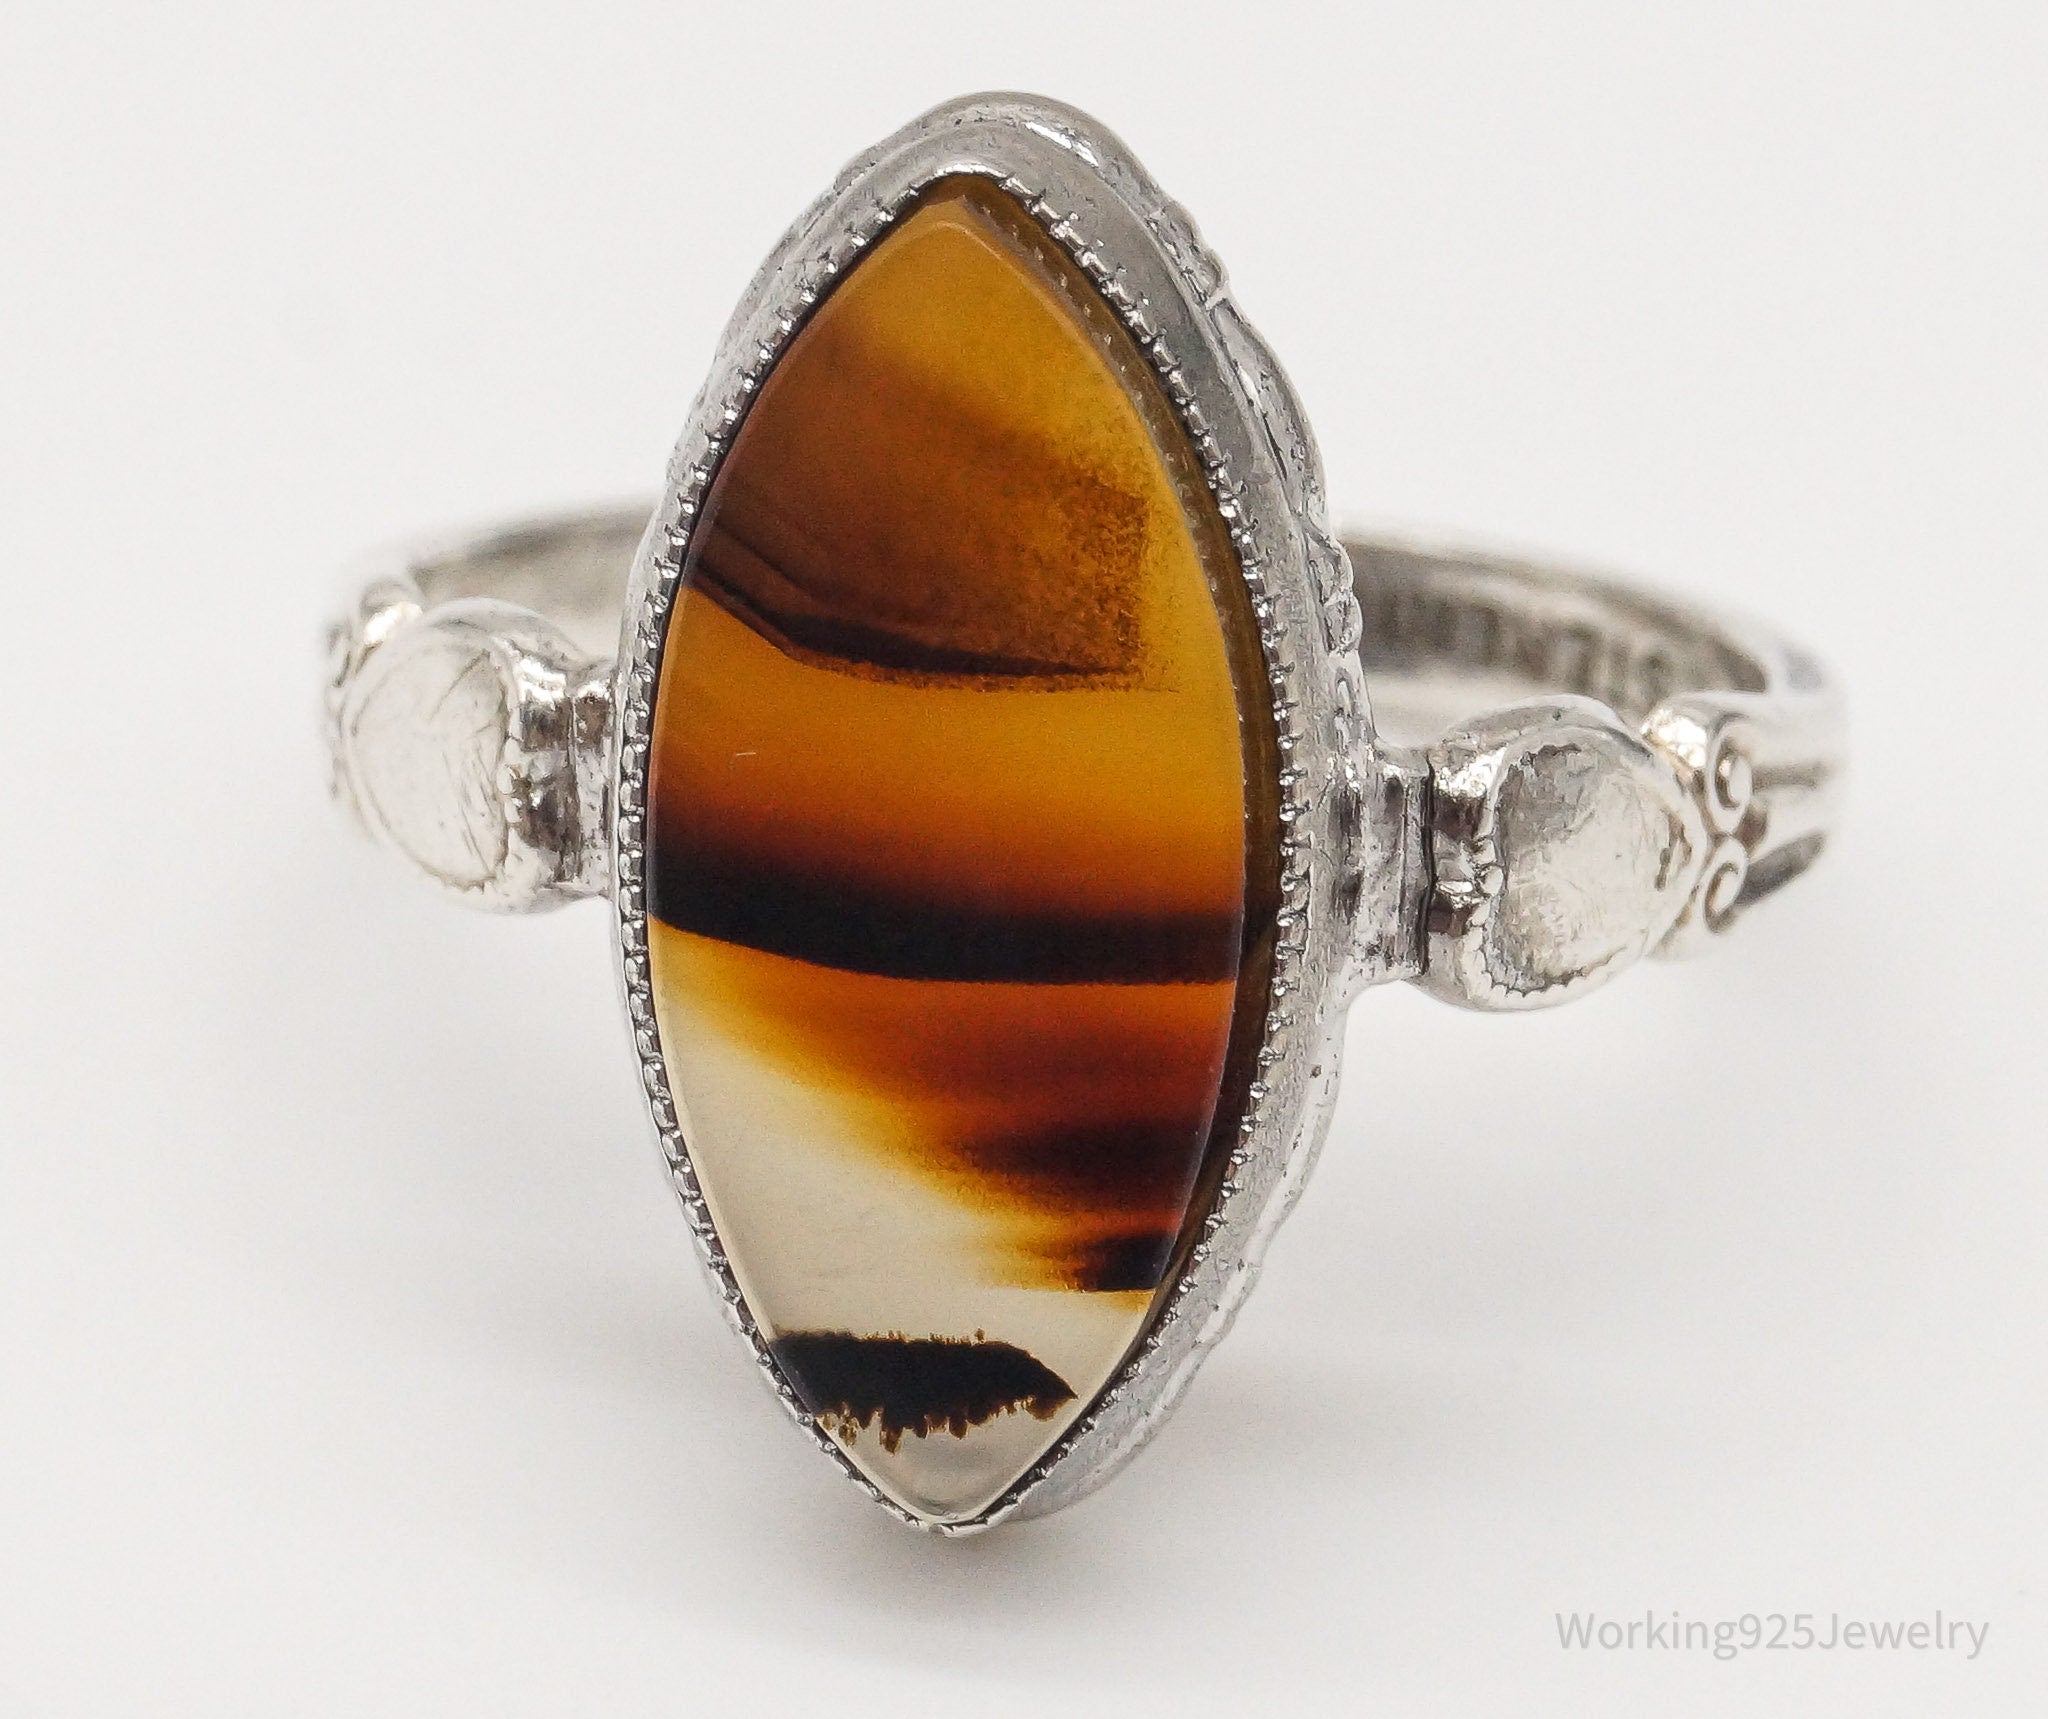 Antique Designer Clark Coombs Agate Sterling Silver Ring Size 7.5